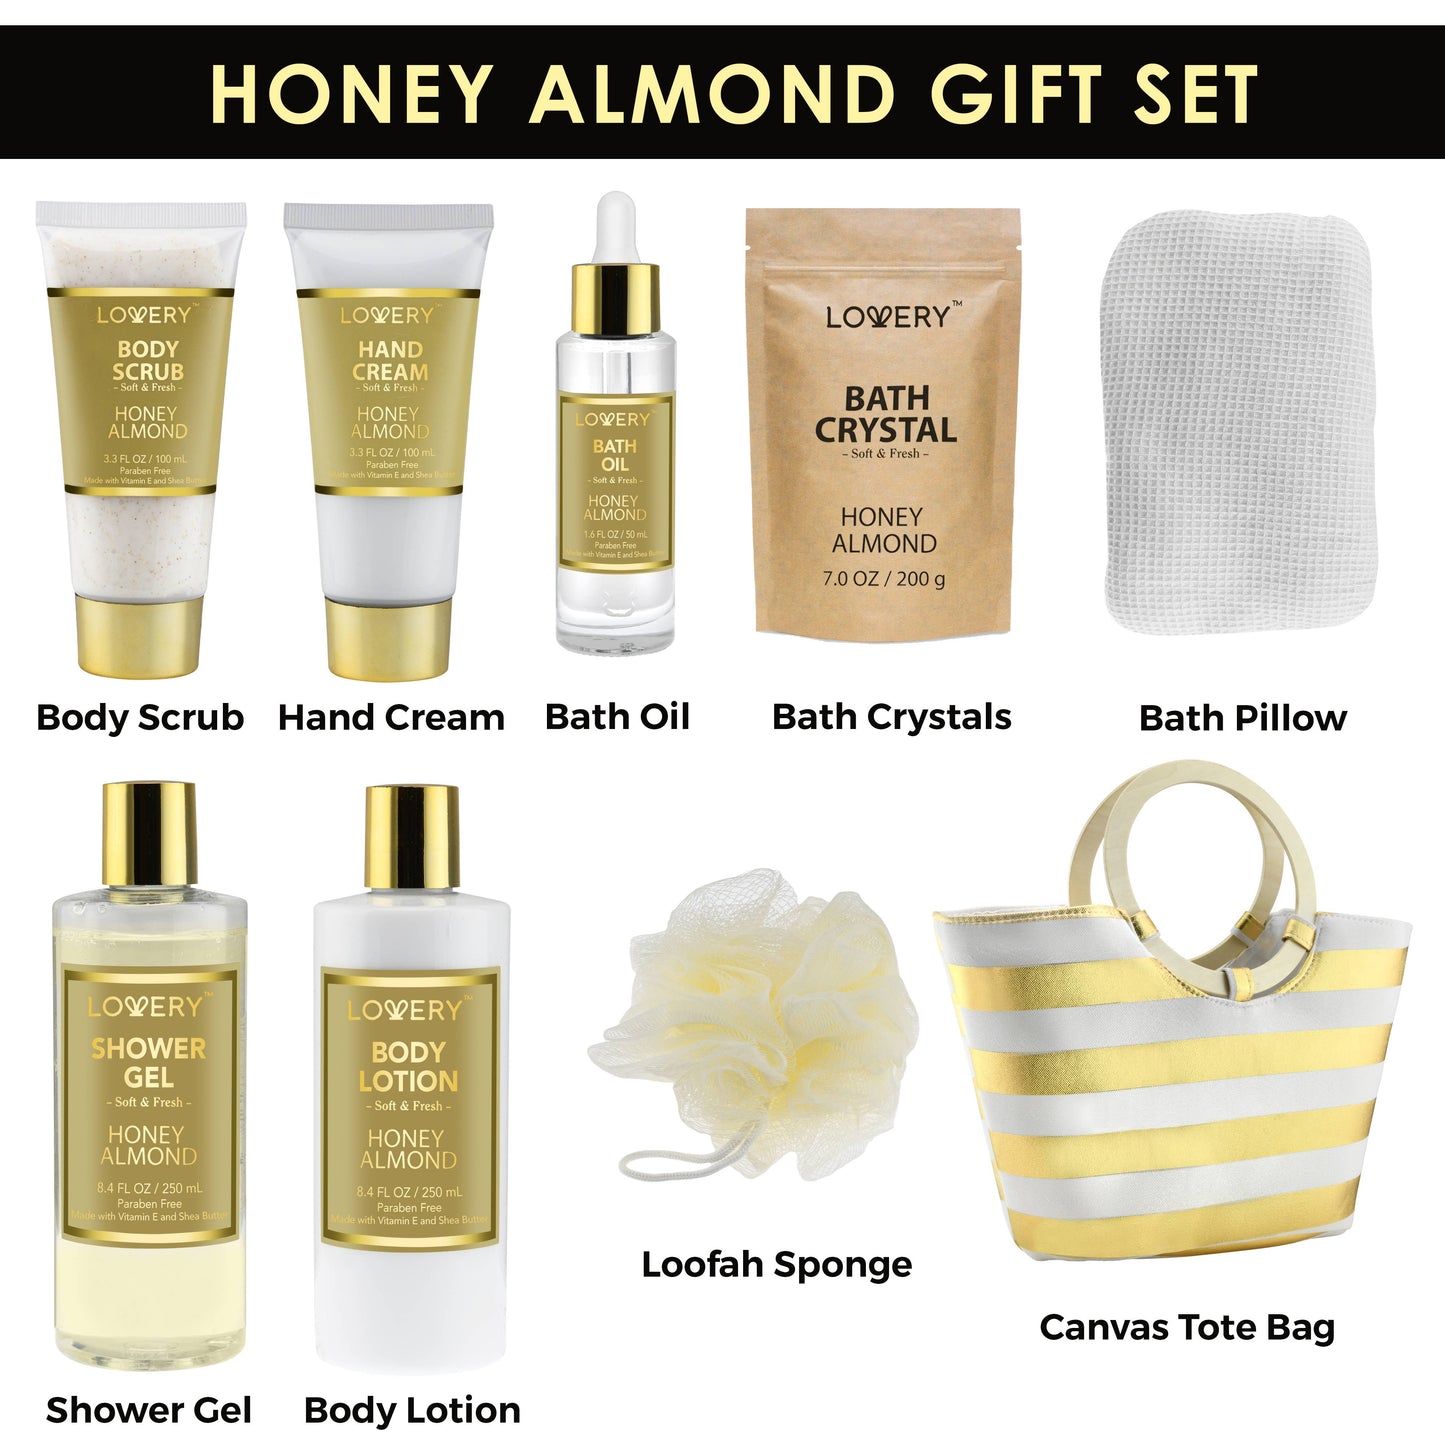 Honey Almond Gift-Ready Tote Bag - 50% OFF - $32.49